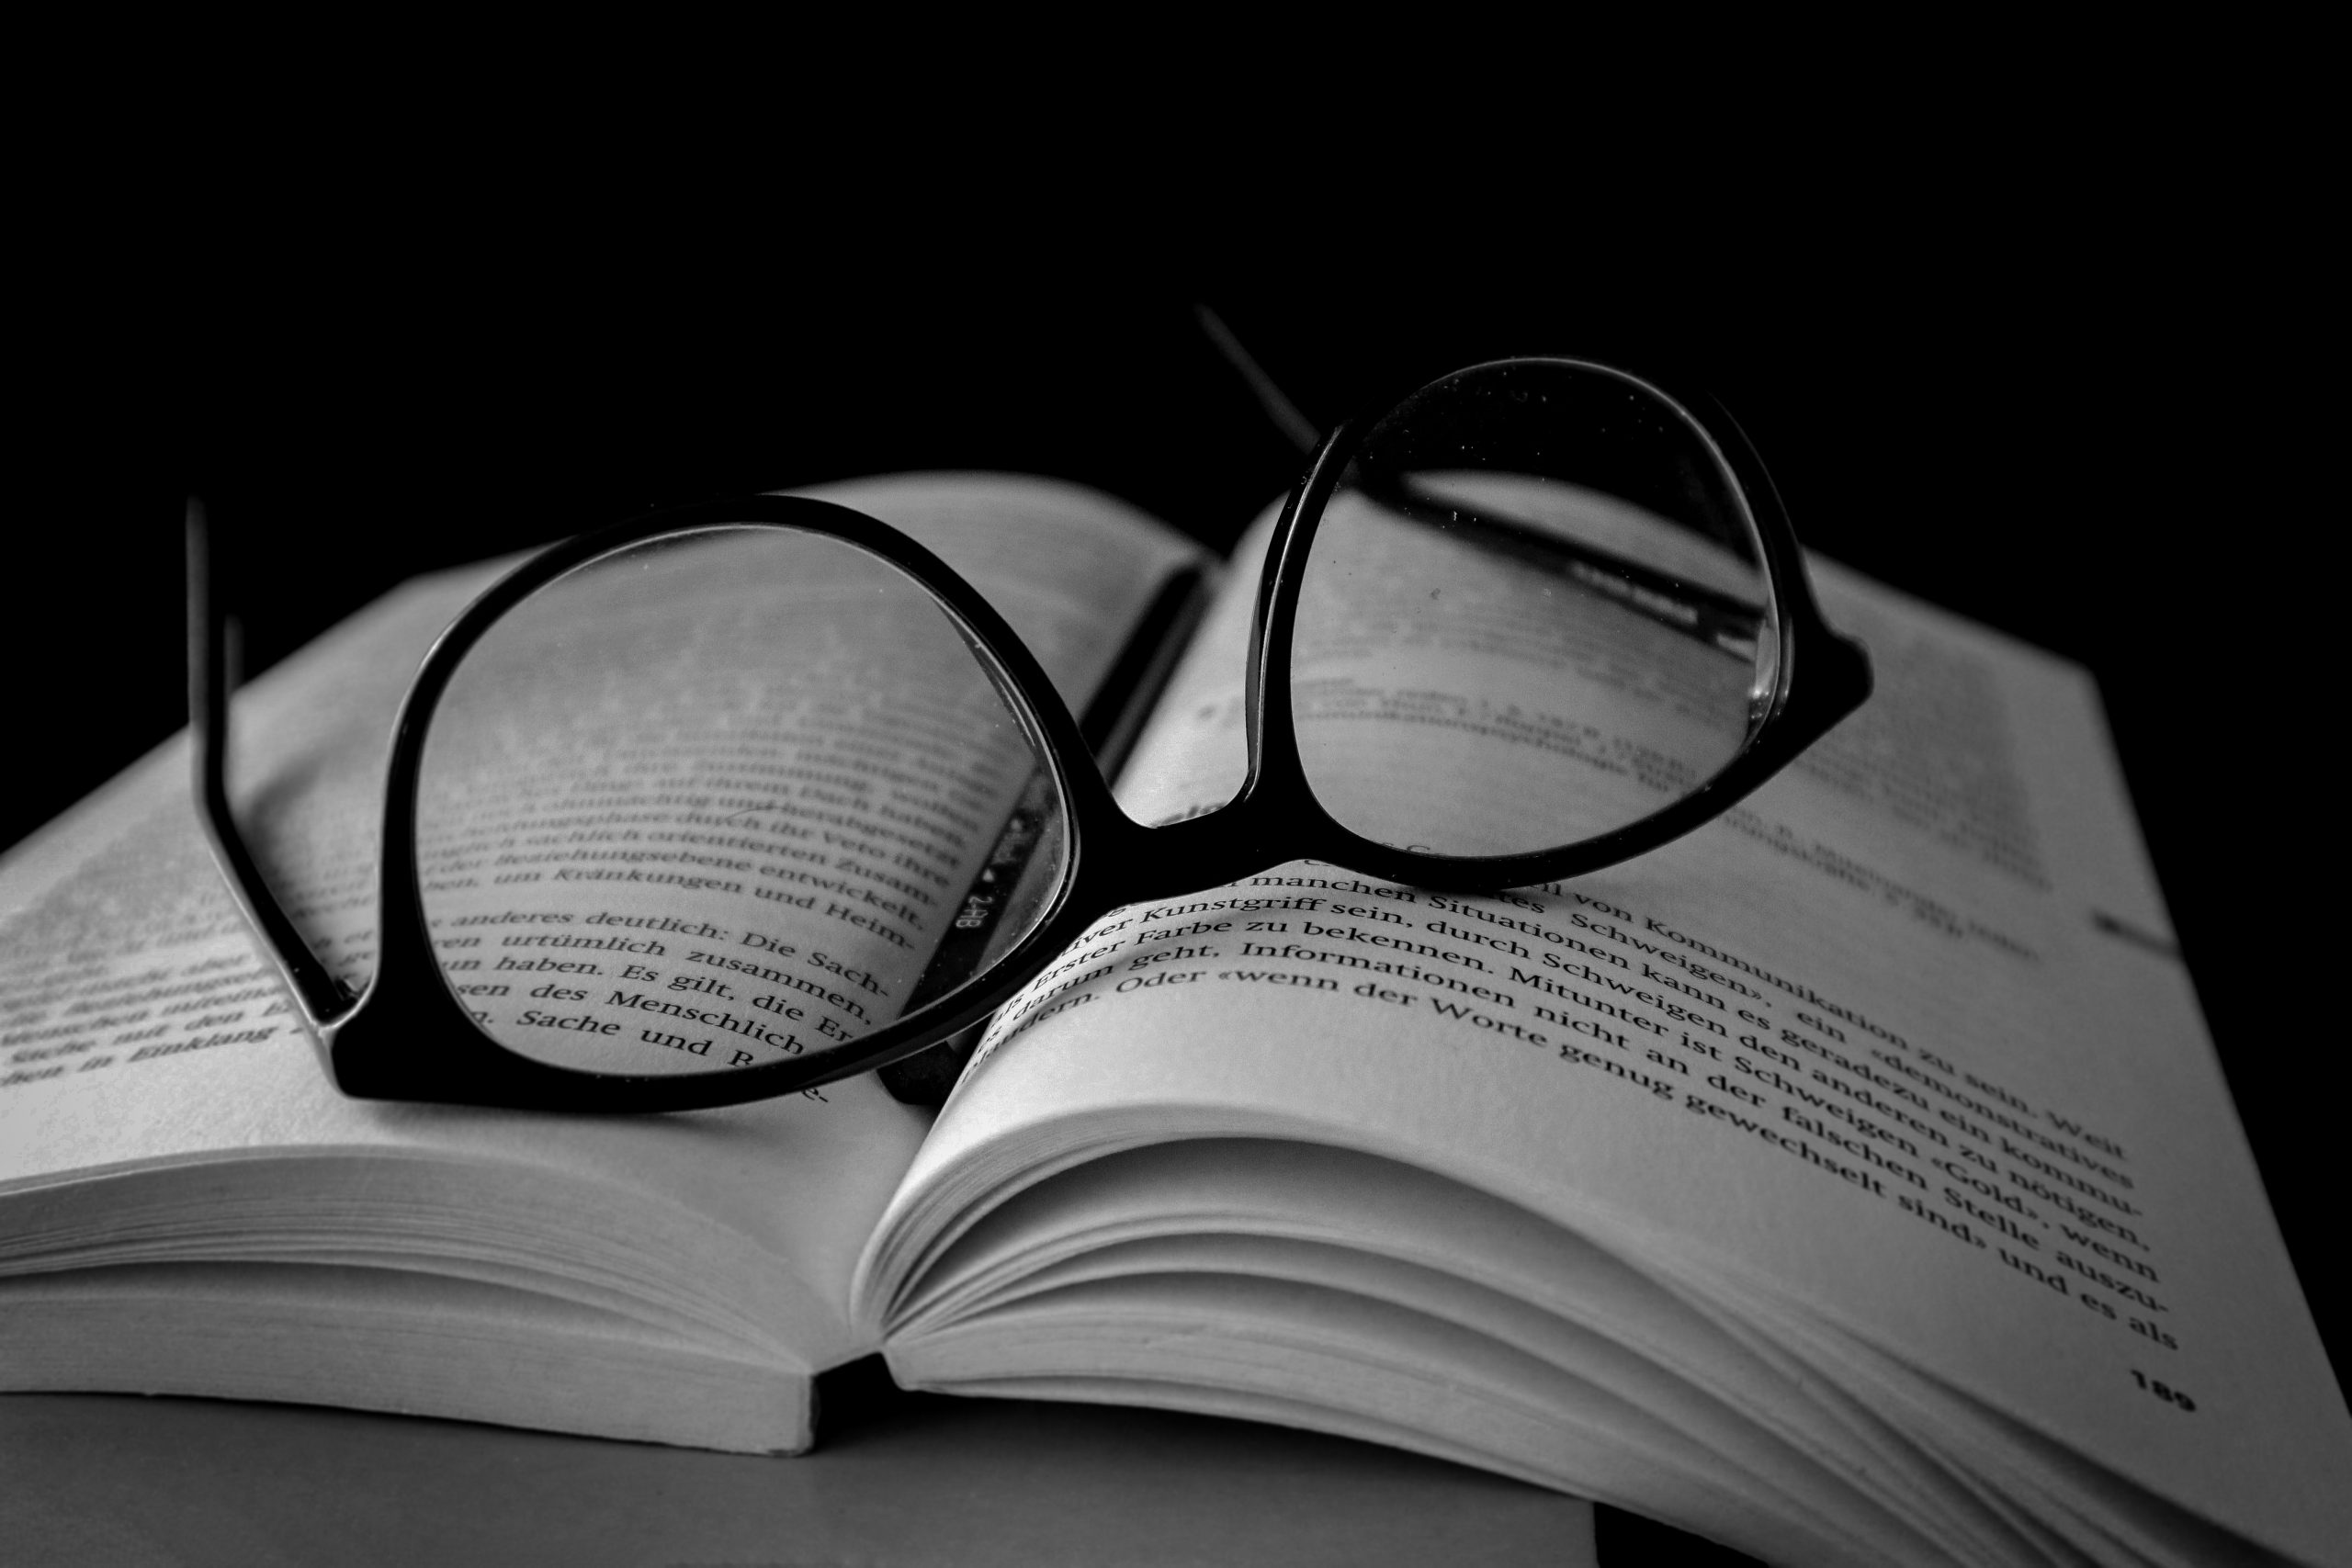 Reader's Book and Eyeglasses on Focus